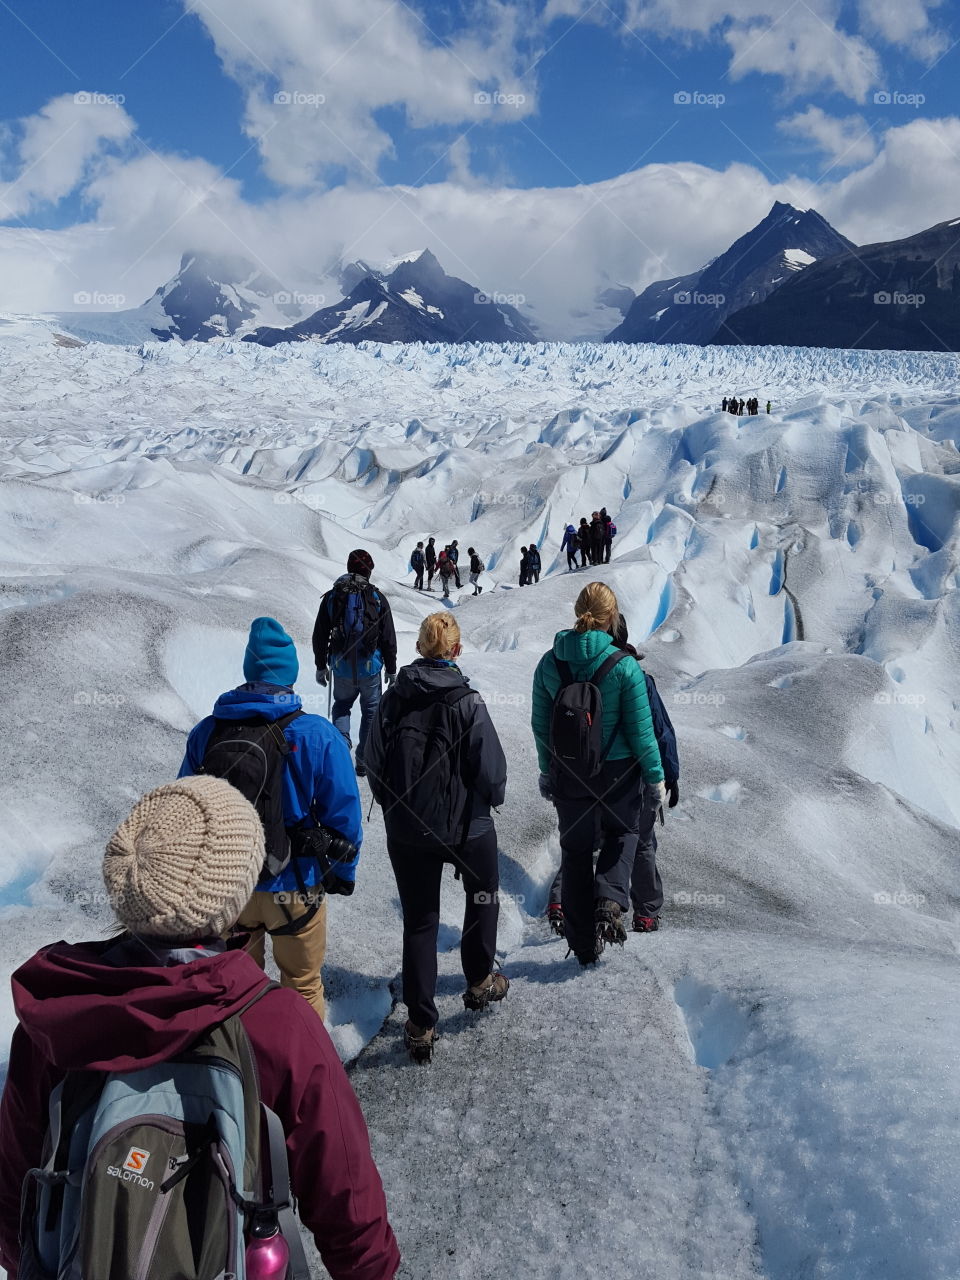 Sometimes you spend your winter vacation flying to Argentina to hike the top of a glacier where it's always a magical winter wonderland.